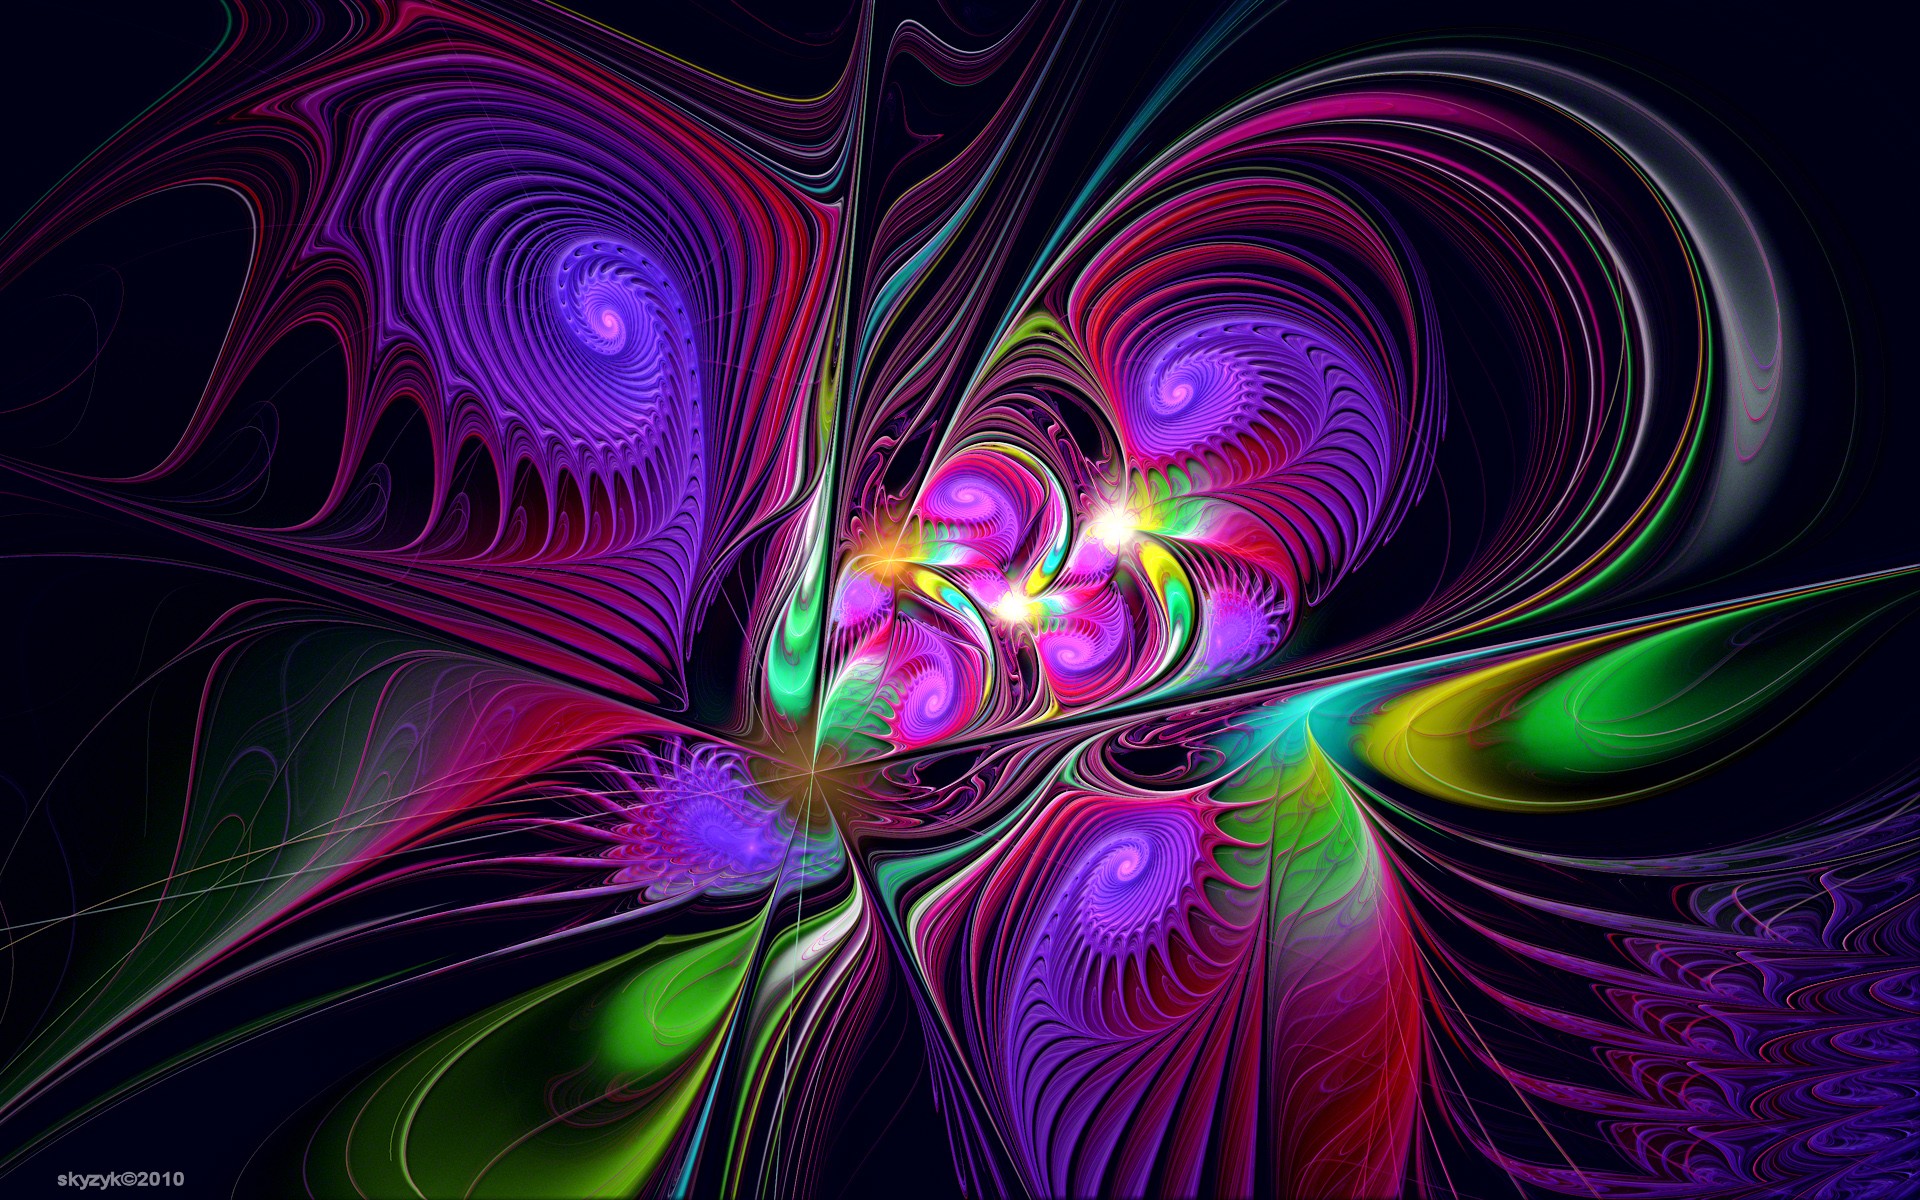 Colorful abstract design perfect for desktop wallpaper.